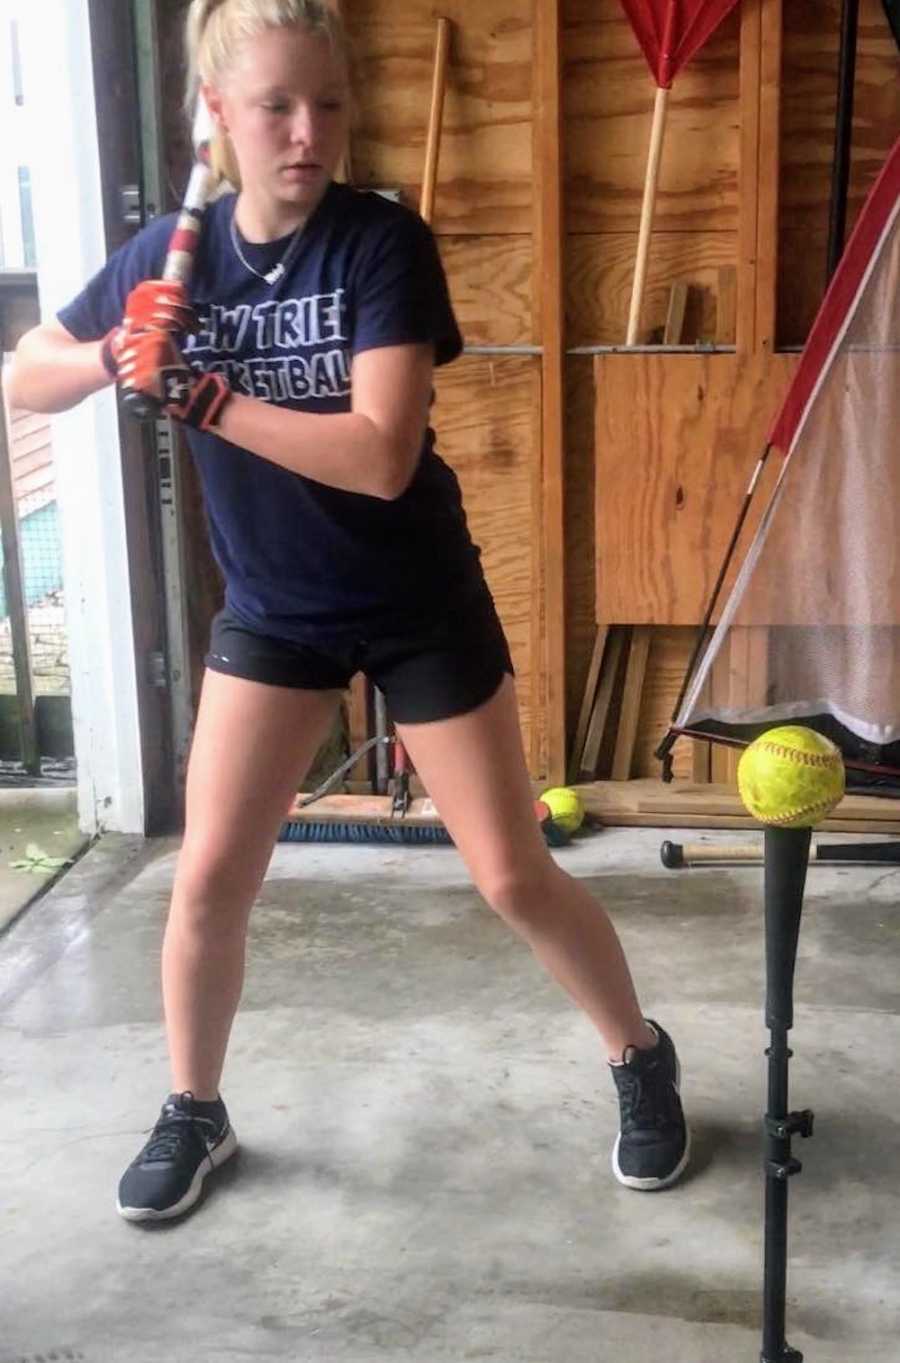 Teen who was told she had gained too much weight at physical stands with bat and softball tee